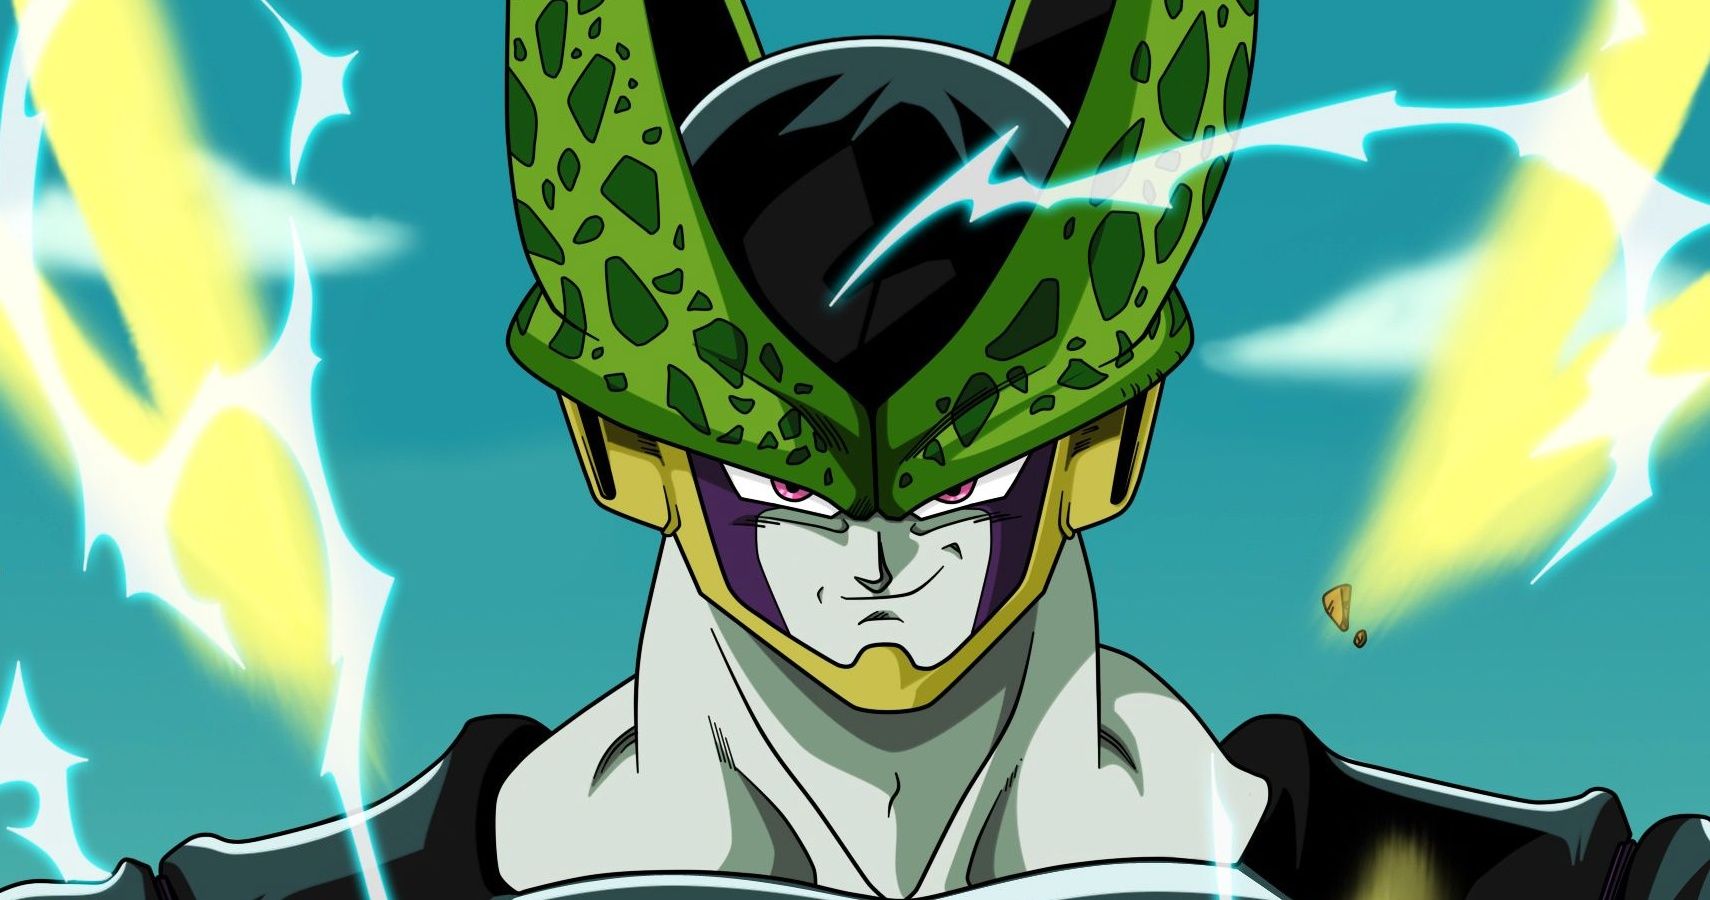 Cell-in-Dragon-Ball-Z-Cropped-1.jpg